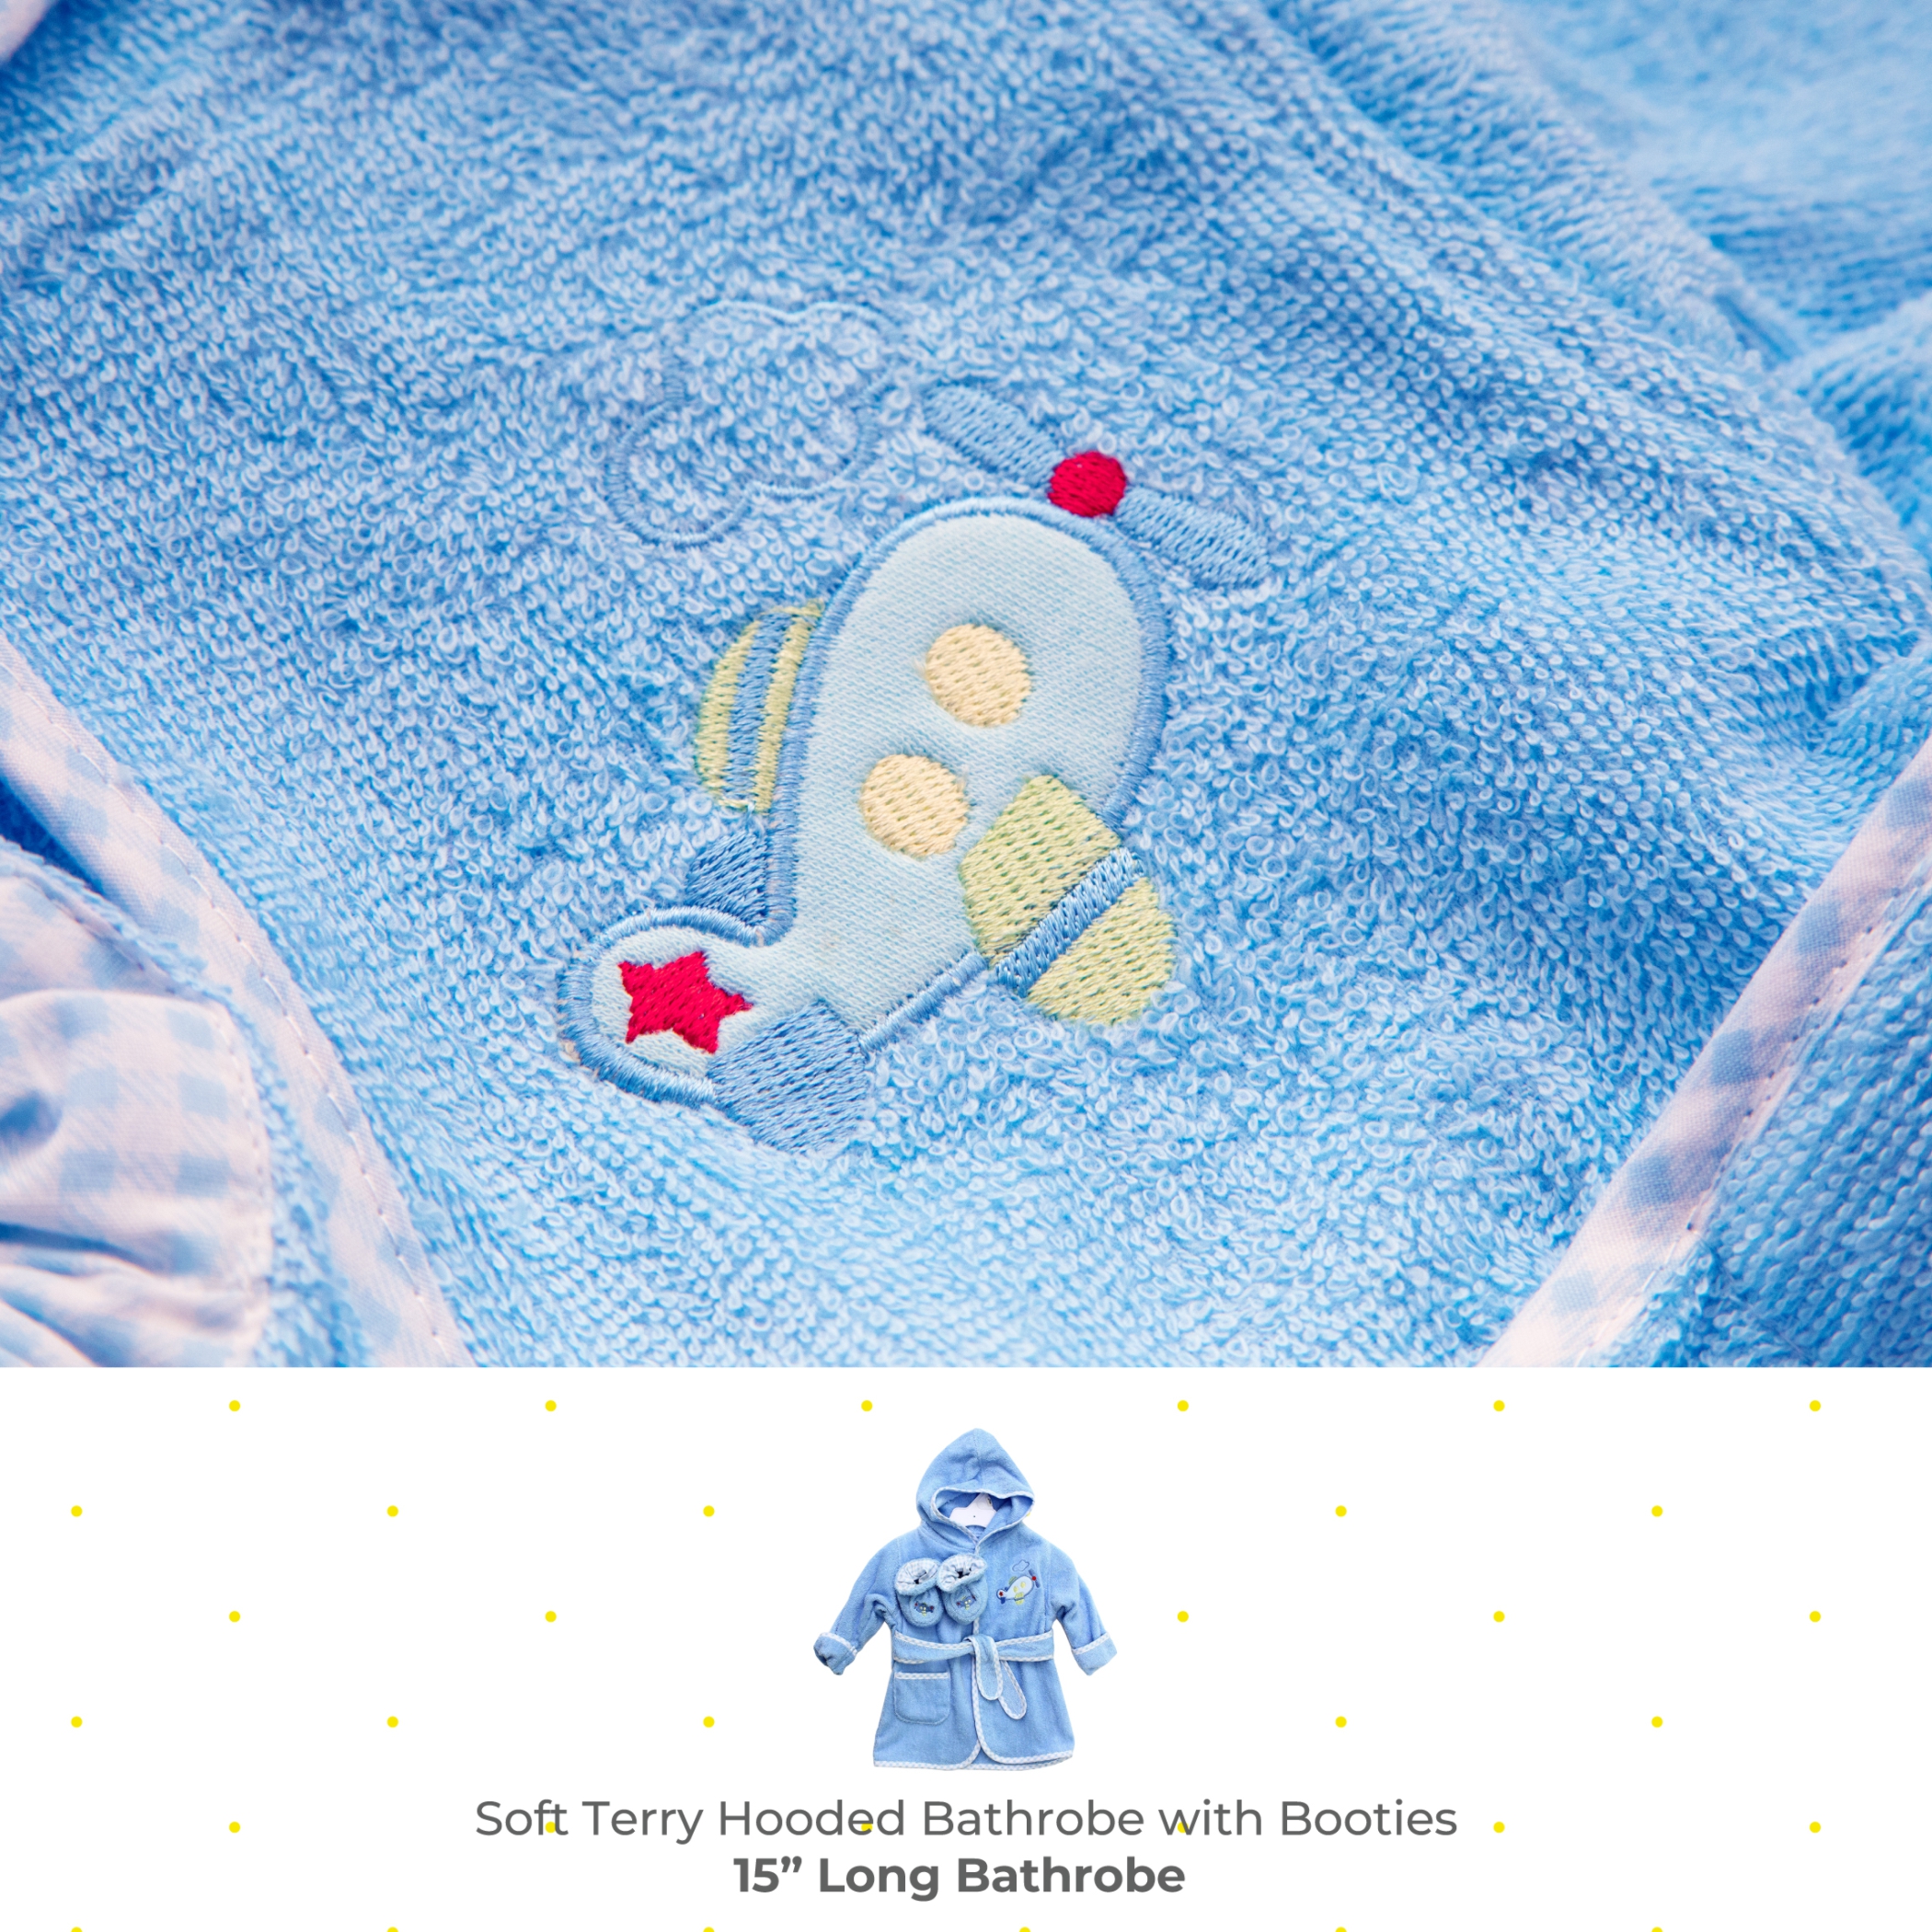 Spasilk Baby Hooded Bathrobe with Booties, Cotton Terry Bath Set for Newborns and Infants, Blue Plane - image 5 of 7